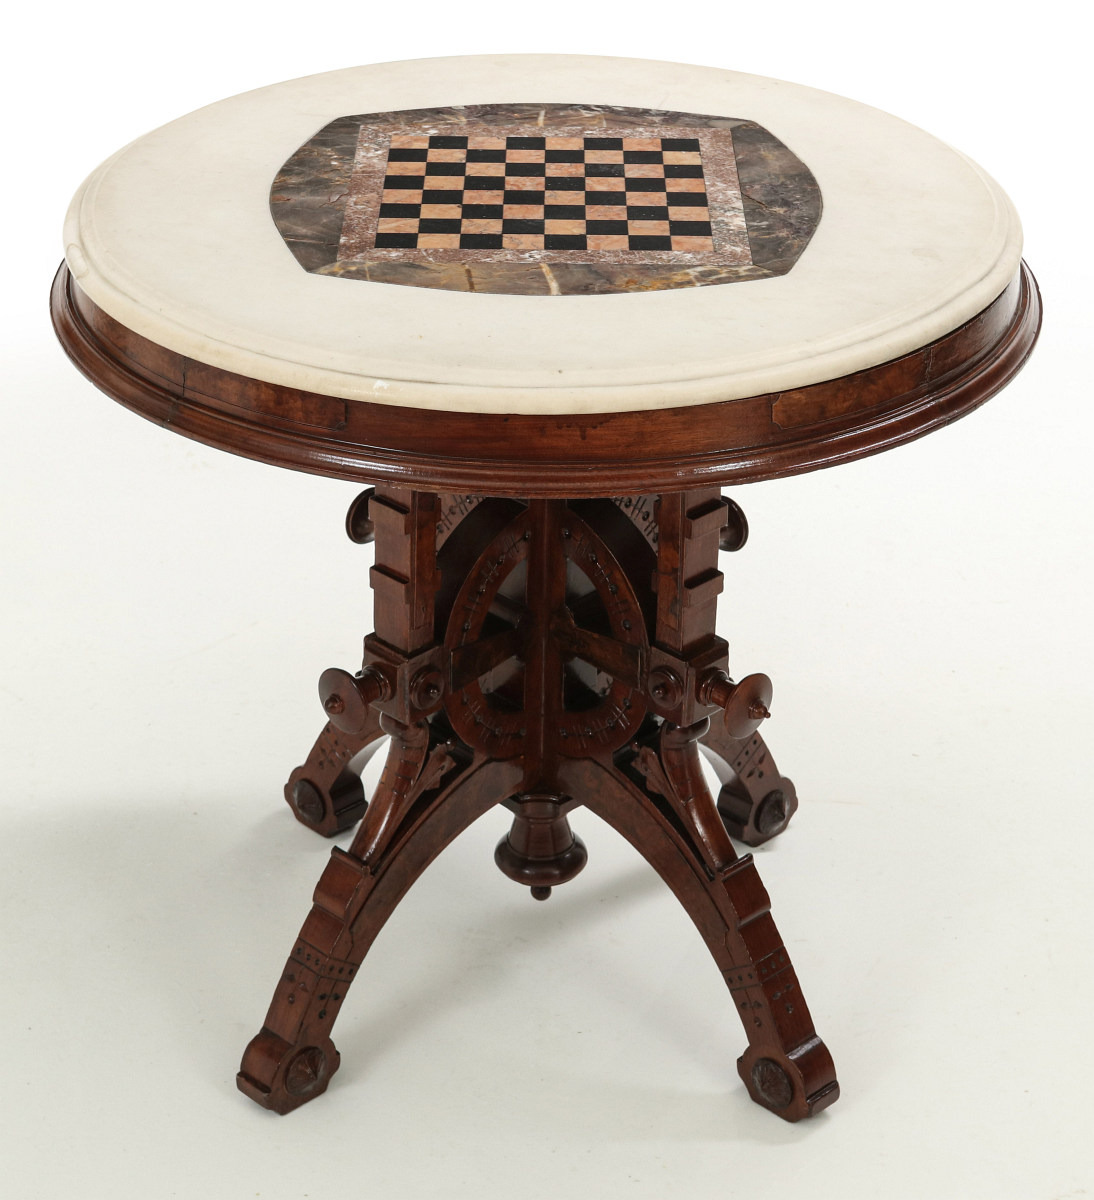 A GOOD 19TH C. AMERICAN PARLOR TABLE WITH GAME BOARD